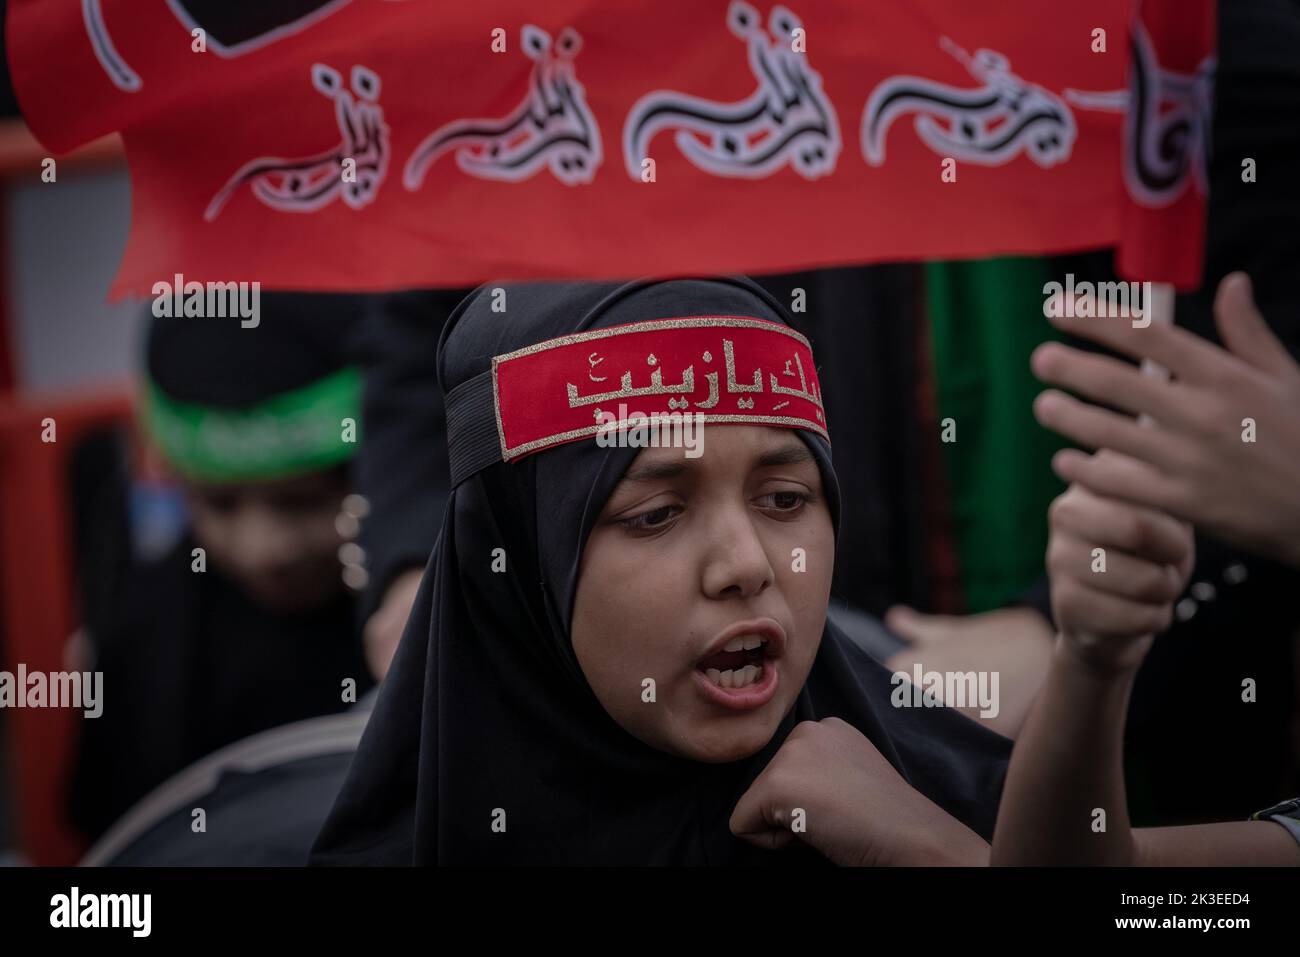 London, UK. 25th September 2022. Hundreds of predominately Shia Muslims gather at Marble Arch for Arbaeen commemorations and procession marking the end of the 40-day mourning period for the seventh-century killing of Iman Hussein, the grandson of Prophet Muhammad. Credit: Guy Corbishley/Alamy Live News Stock Photo